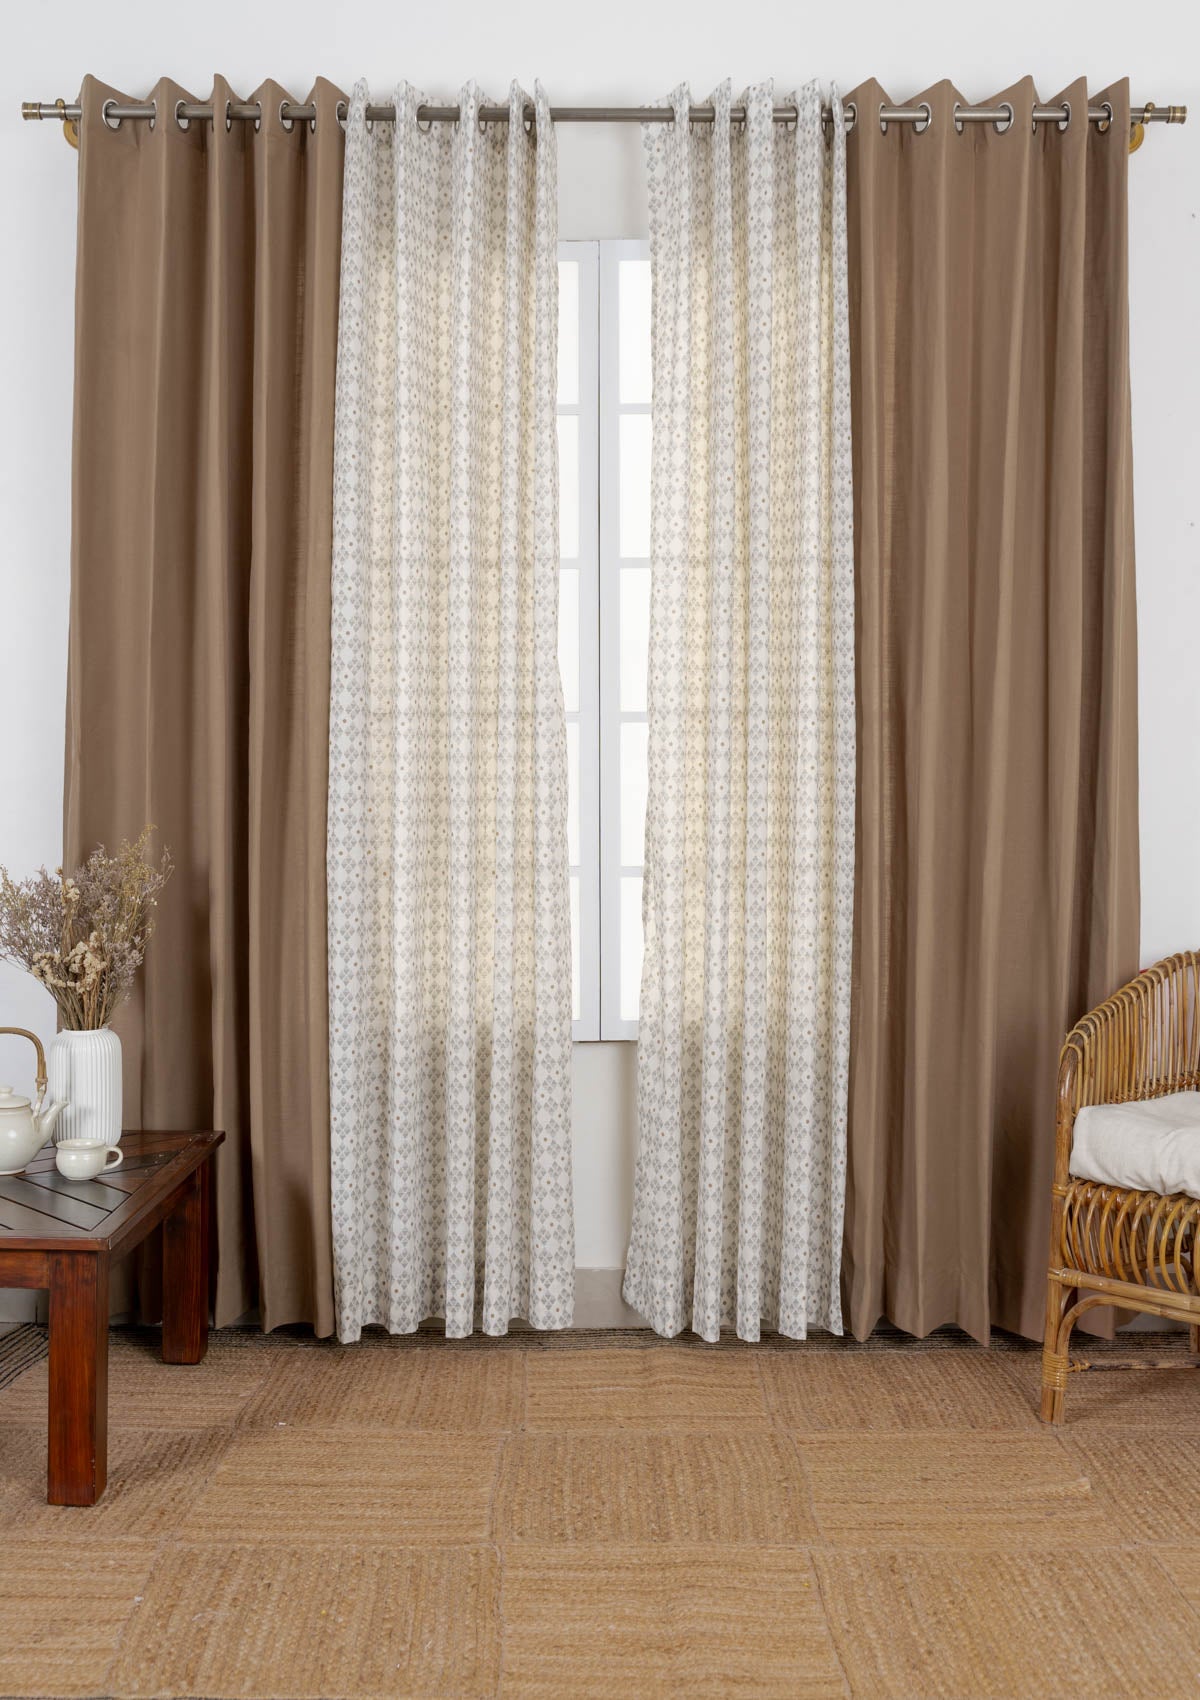 Solid Choclate brown cotton curtain with Mirage geometric sheer 100% cotton curtains for living room - Set of 4